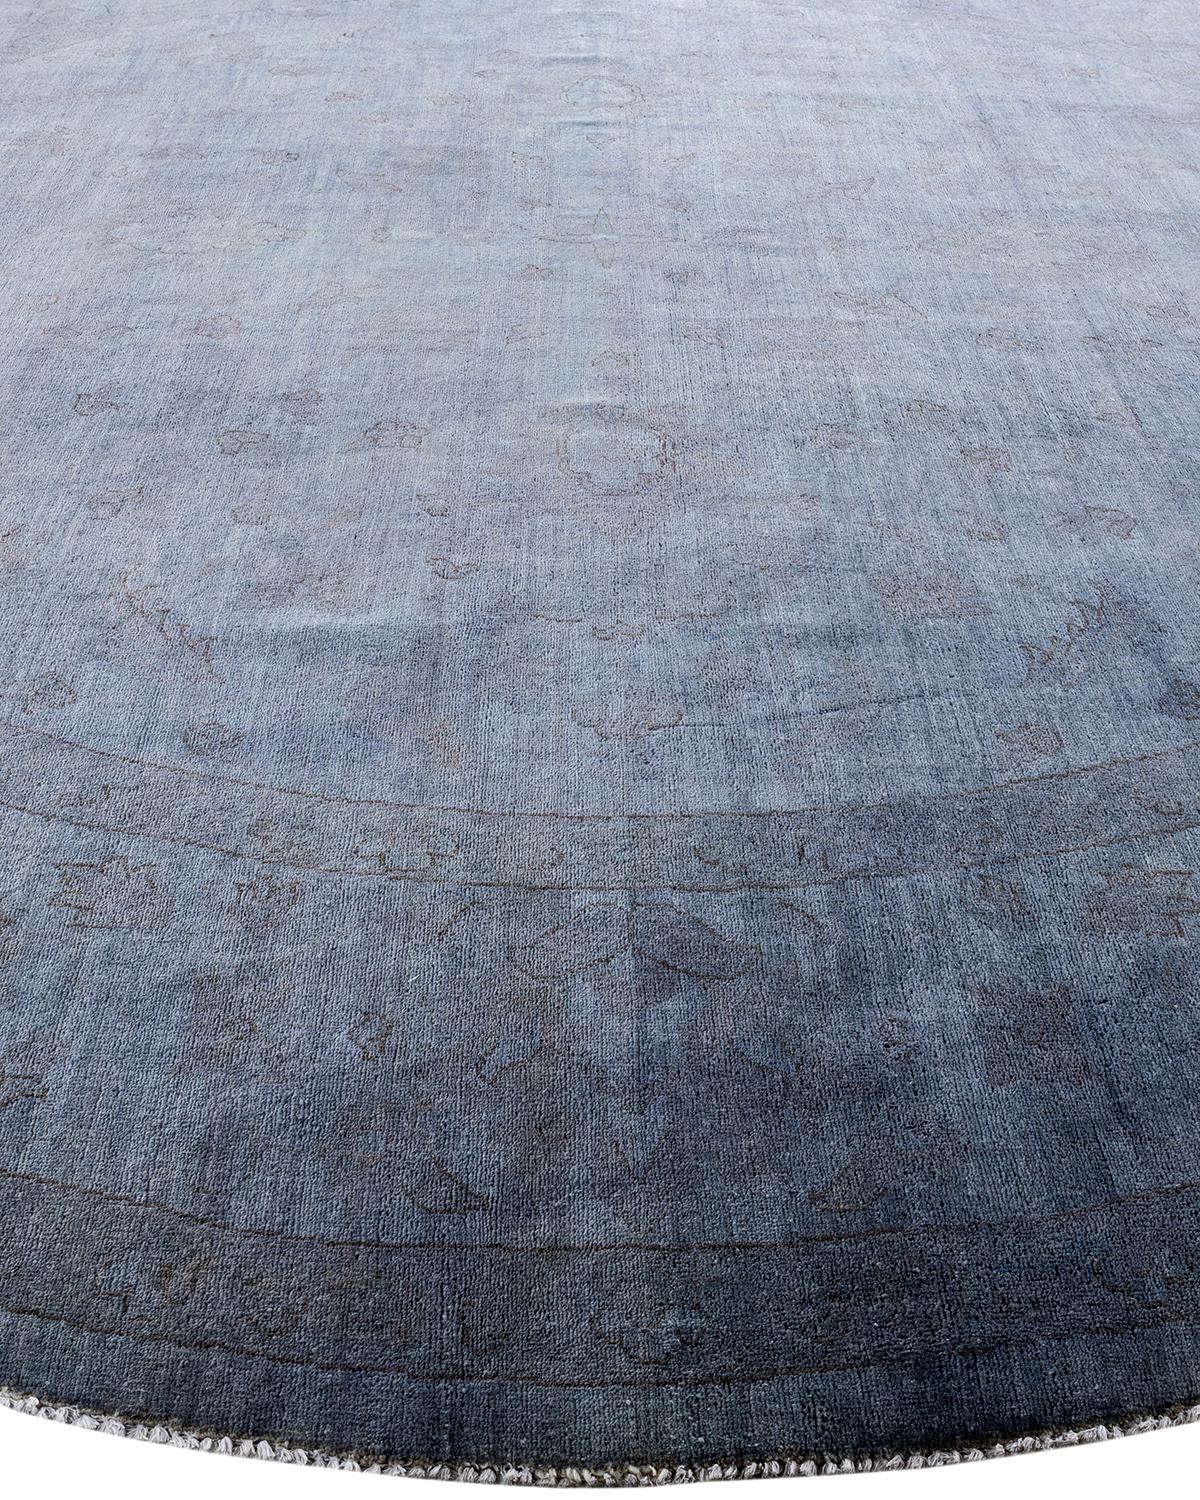 Contemporary Overdyed Hand Knotted Wool Gray Round Area Rug In New Condition For Sale In Norwalk, CT